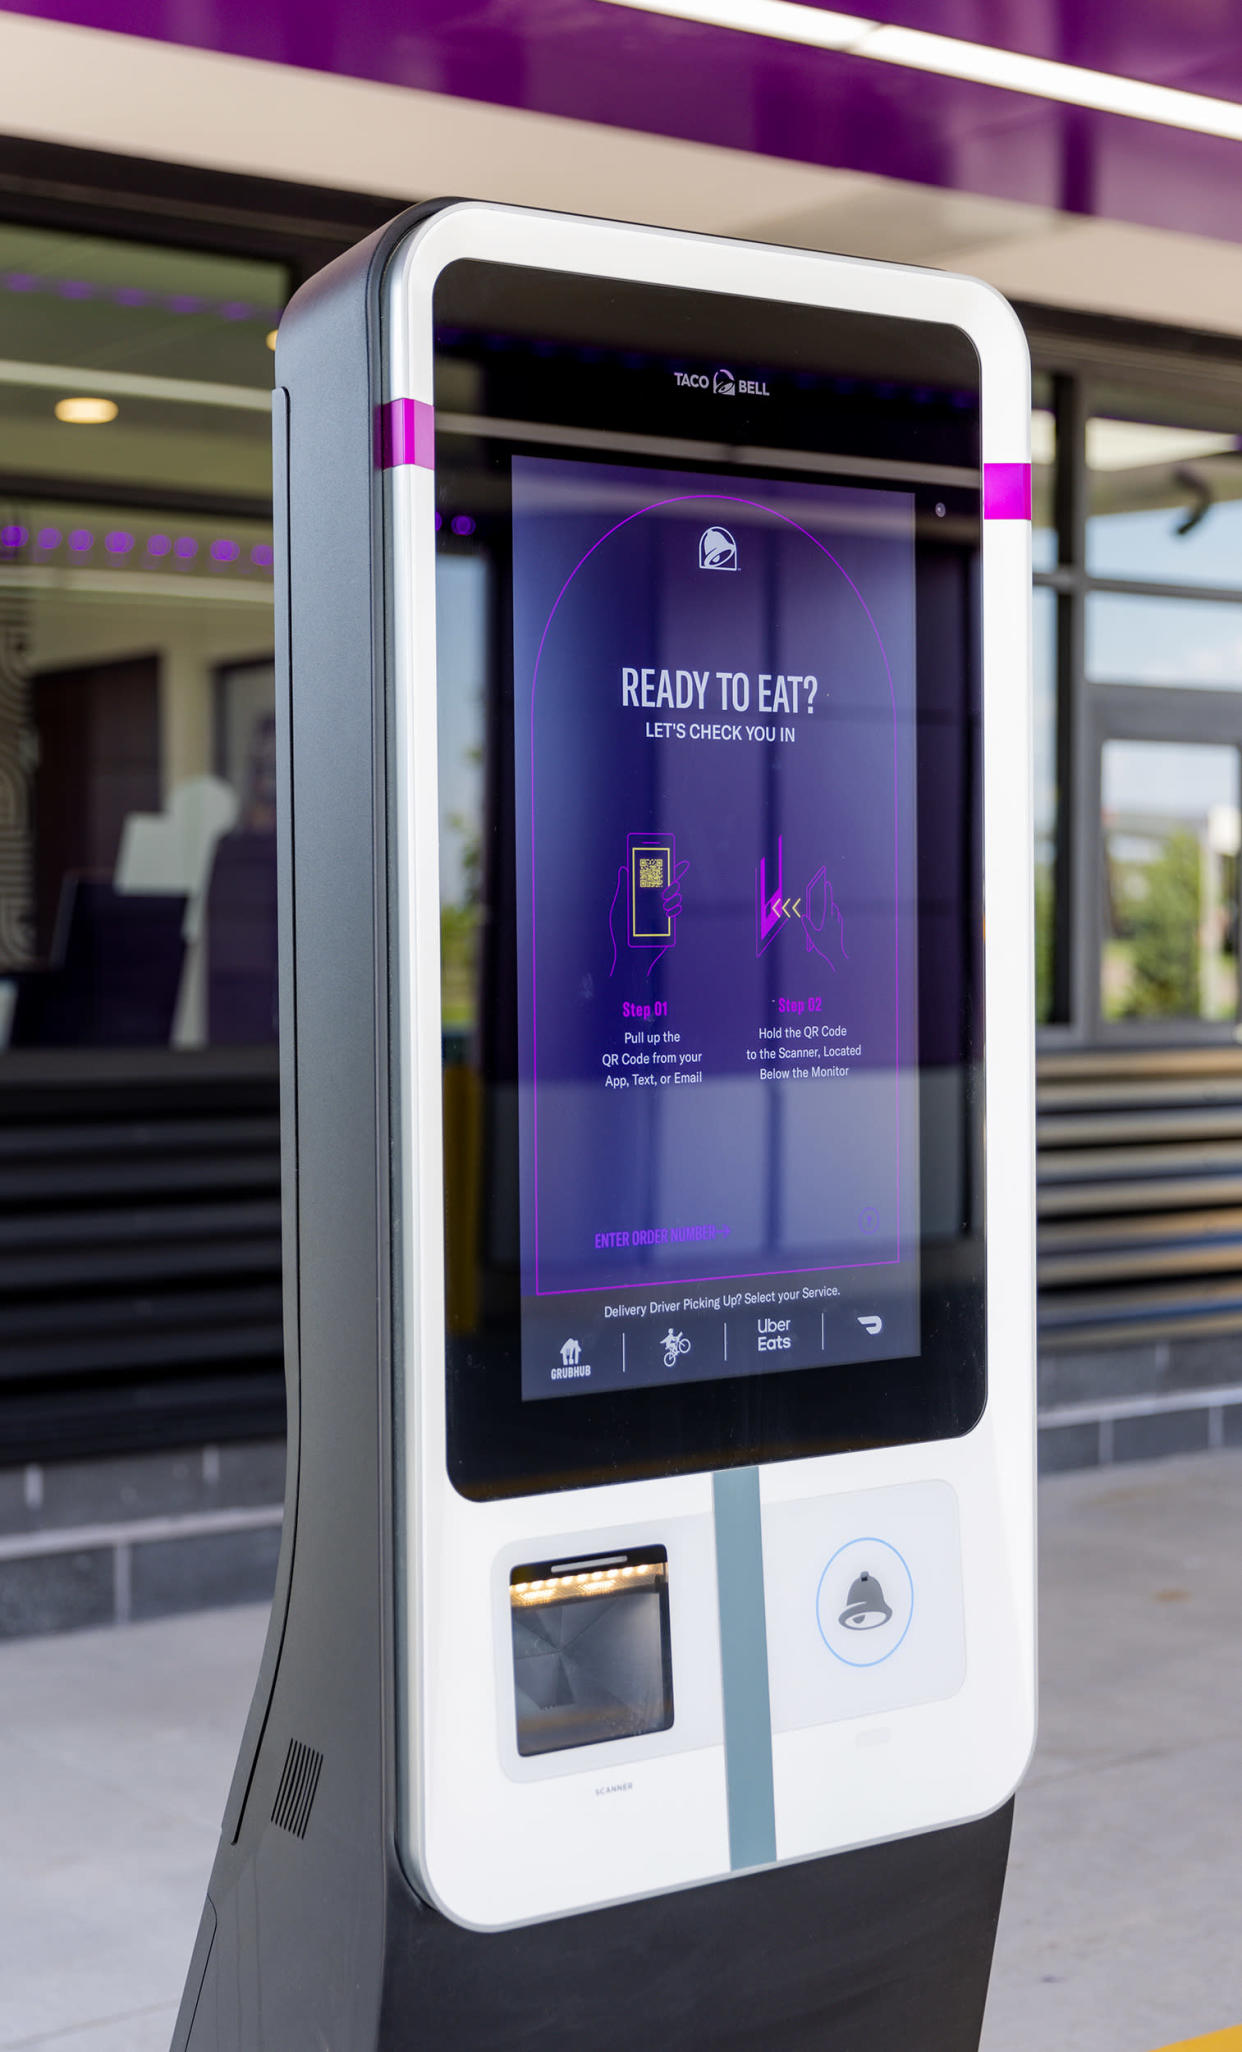 The new Taco Bell location will provide digital check-in screens for mobile order customers with unique QR codes.  (Courtesy Taco Bell)